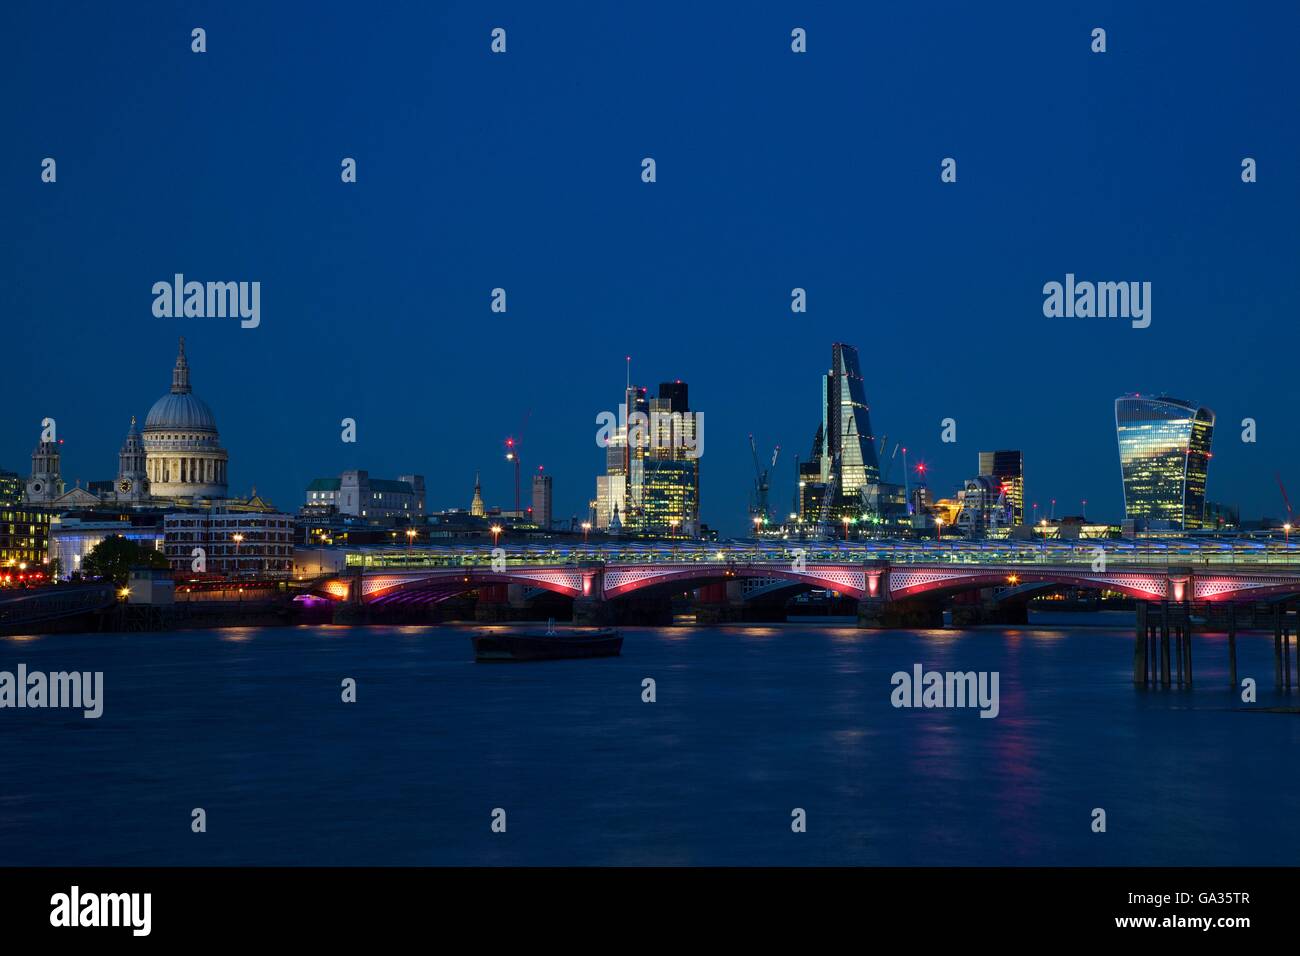 St Paul's Cathedral,Walkie-talkie, Cheesegrater  Blackfriars Bridge and River Thames at dusk, taken from South Bank Stock Photo